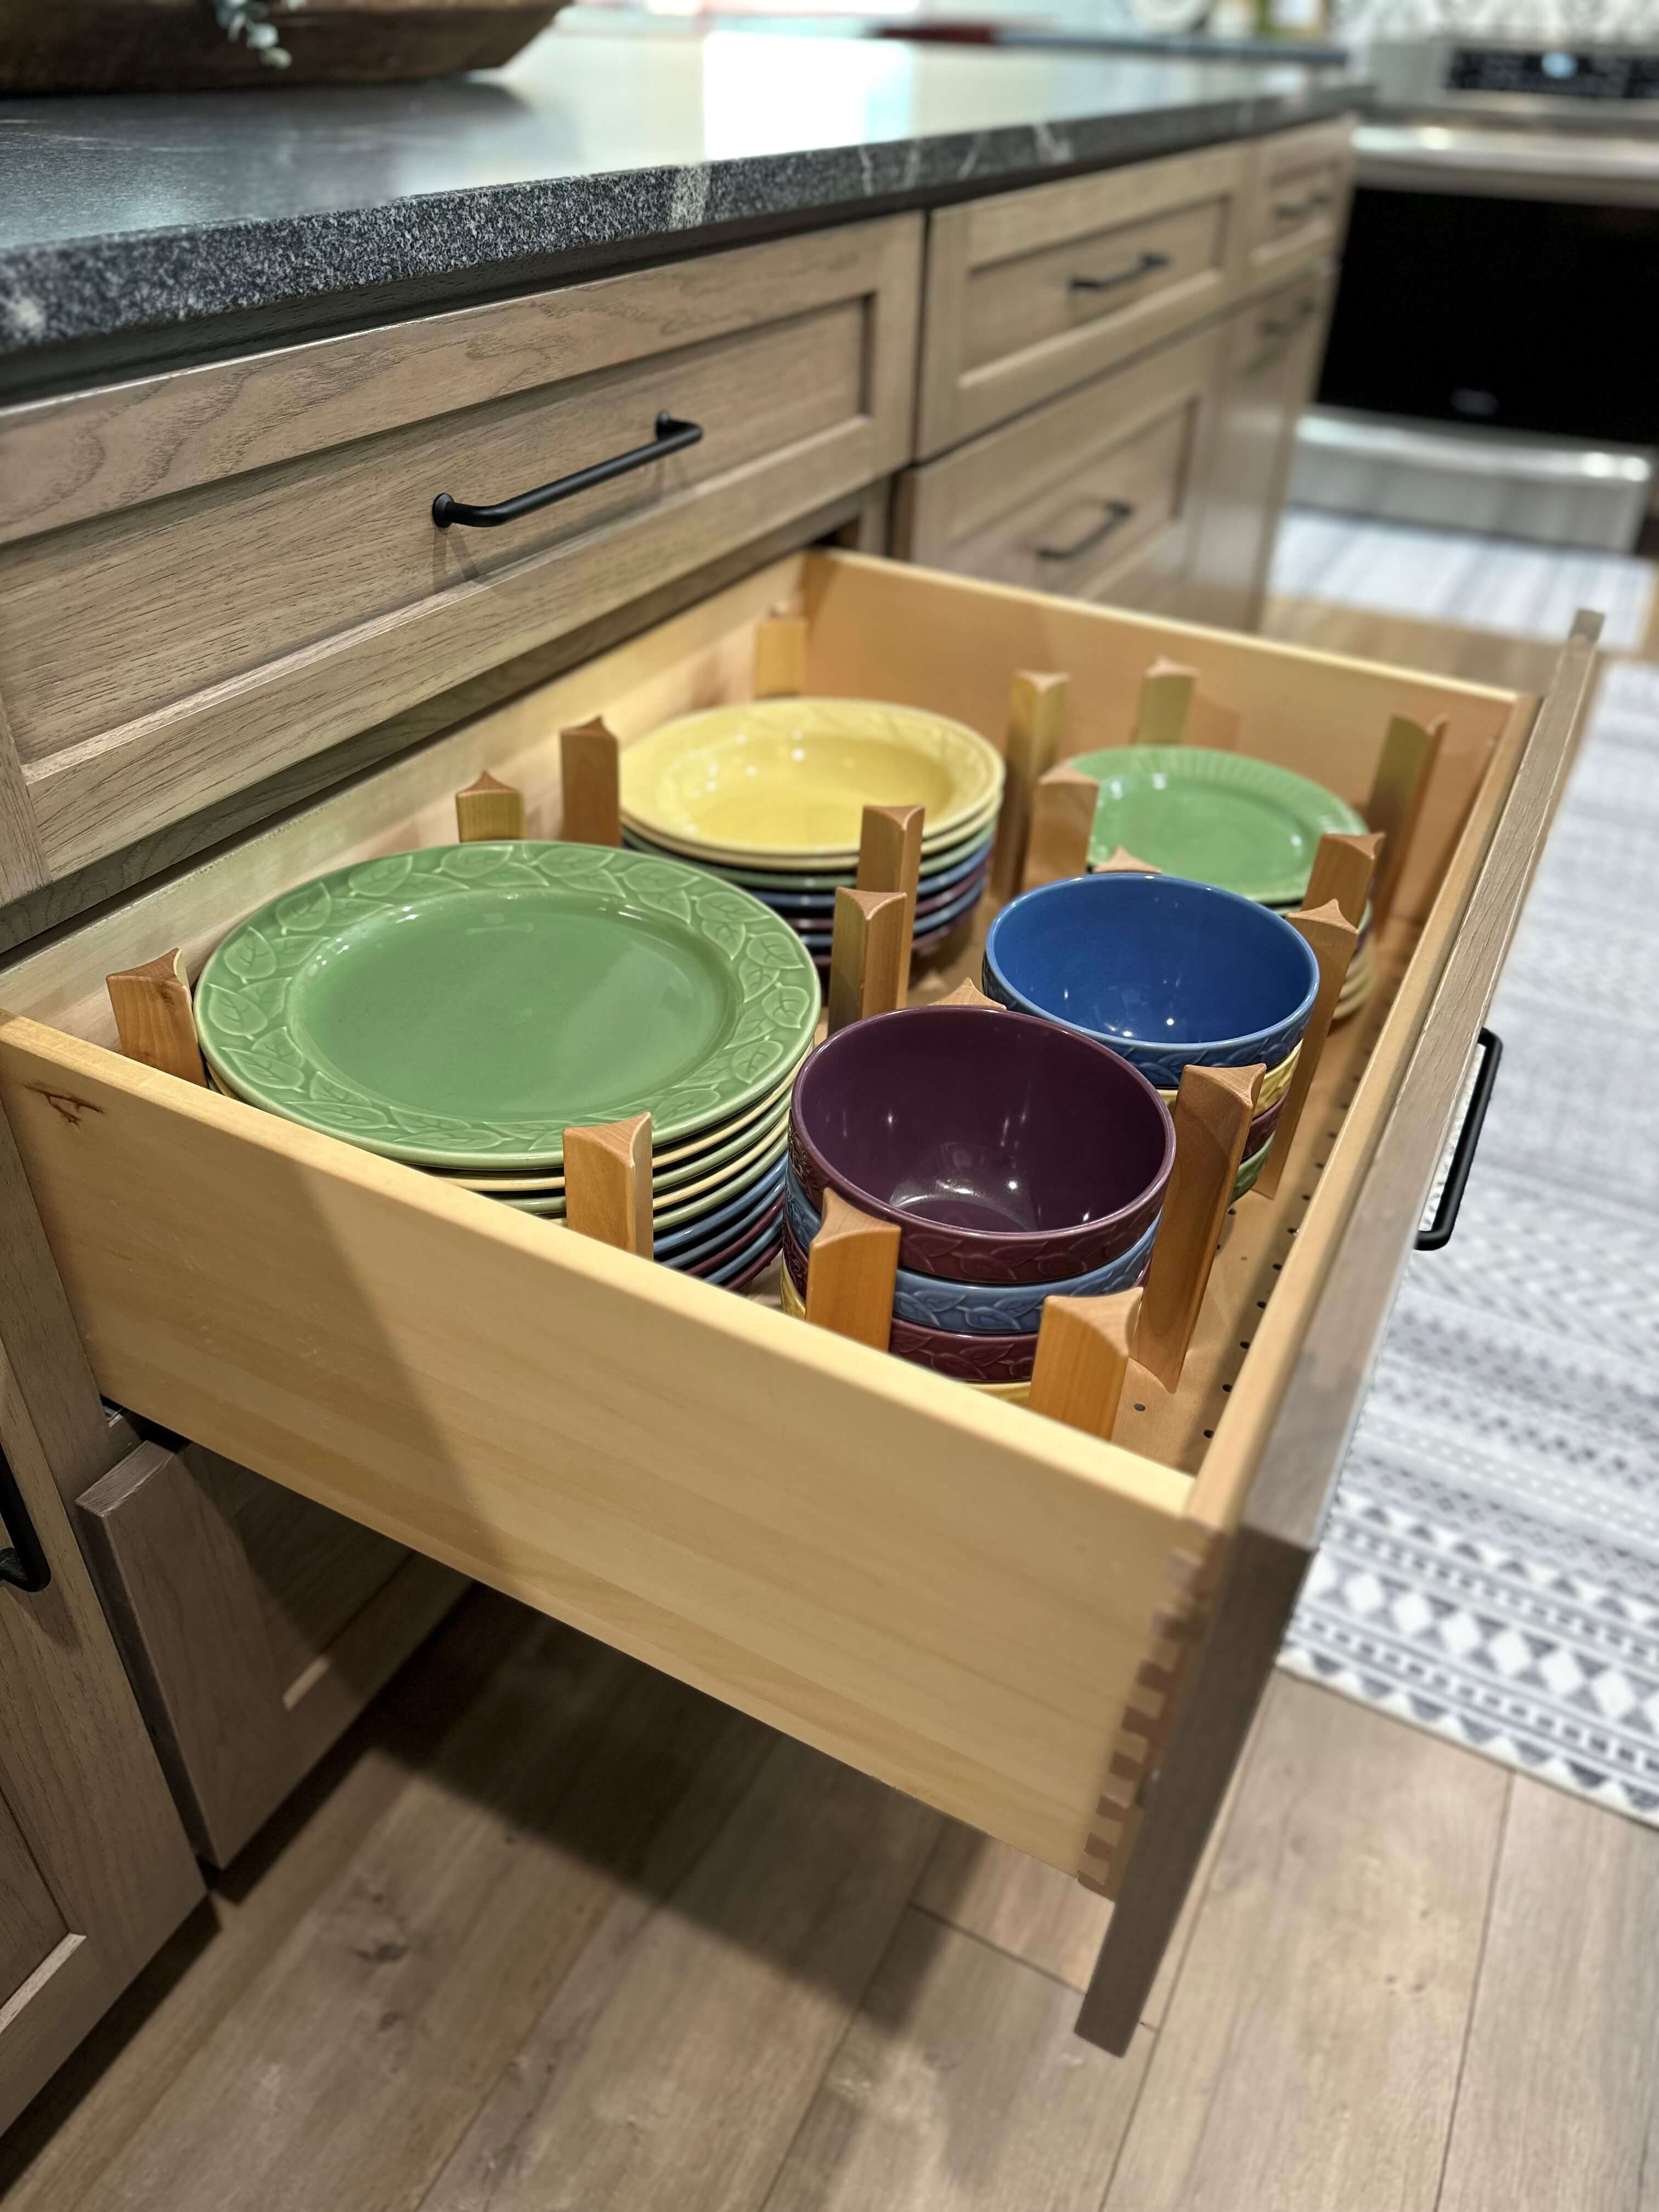 A deep drawer in the kitchen island organizes and securly stores a full collection of dishes and bowls.